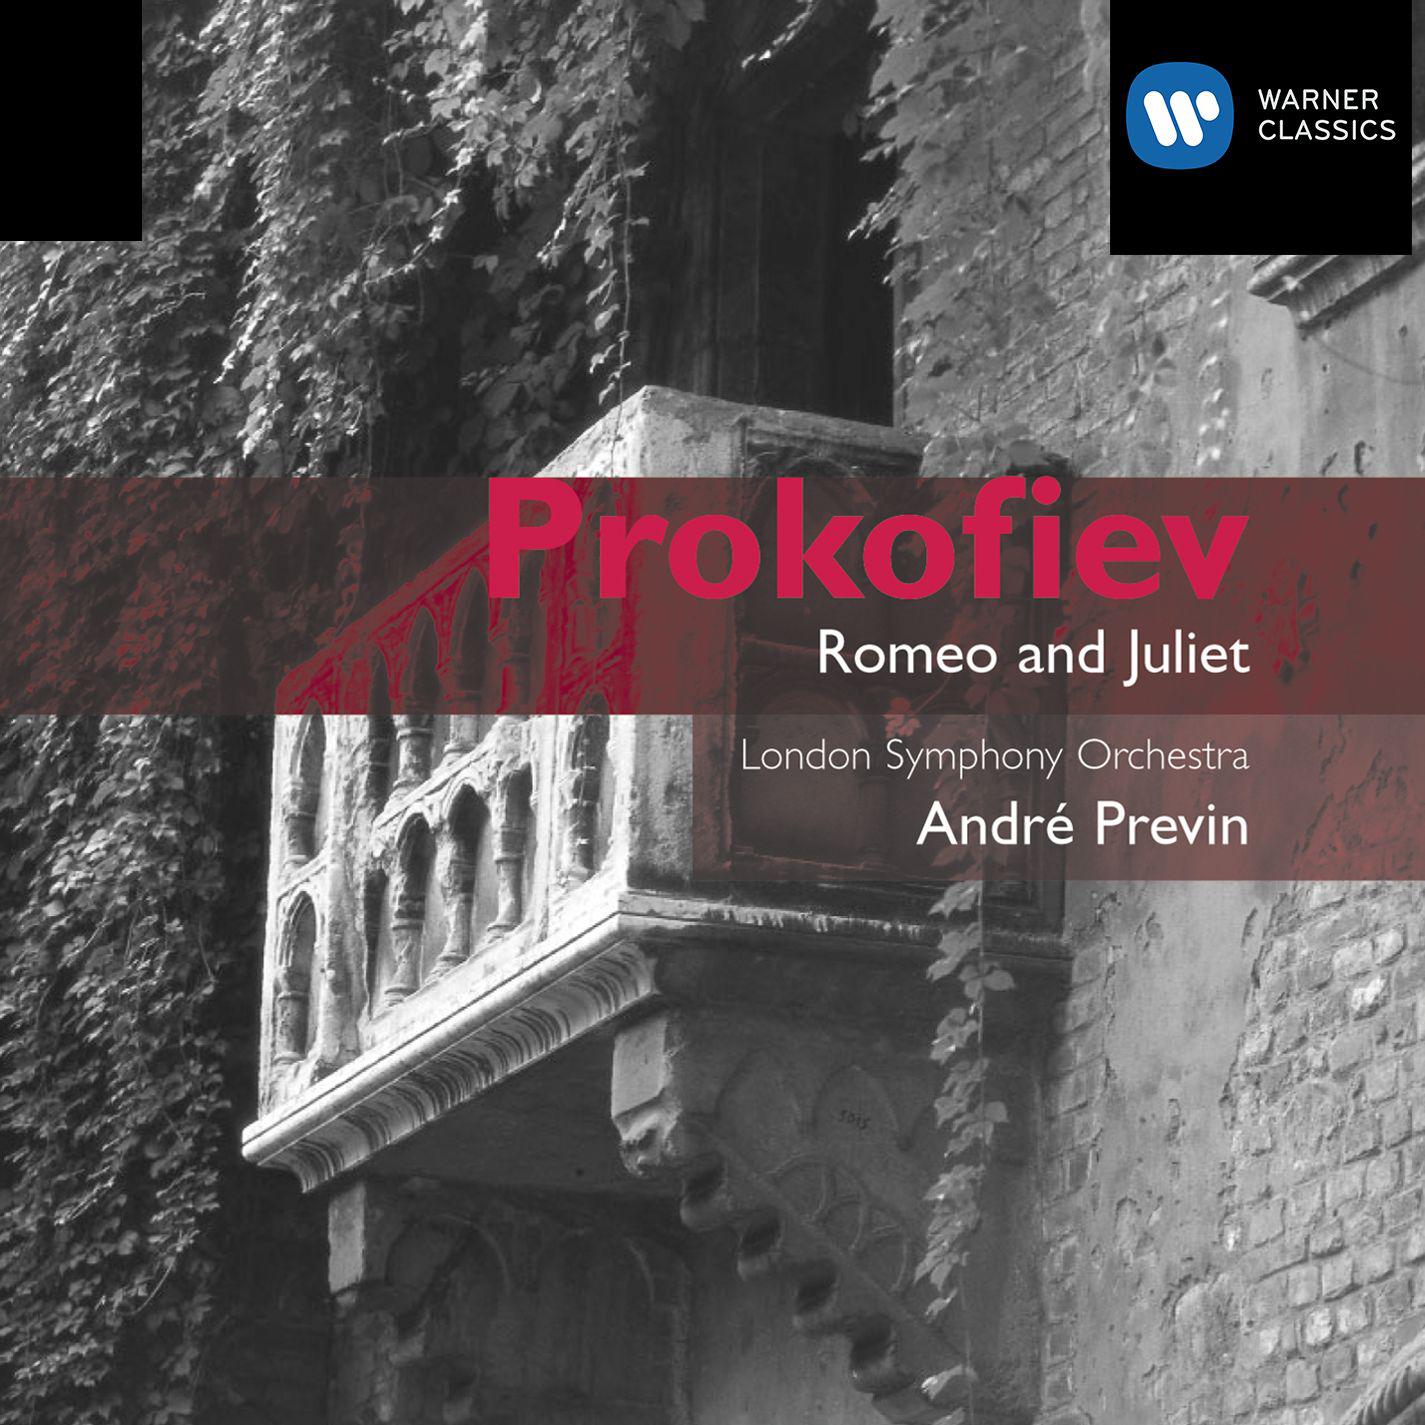 Romeo and Juliet (Complete Ballet), Op. 64, Act 1:No. 6, The Fight